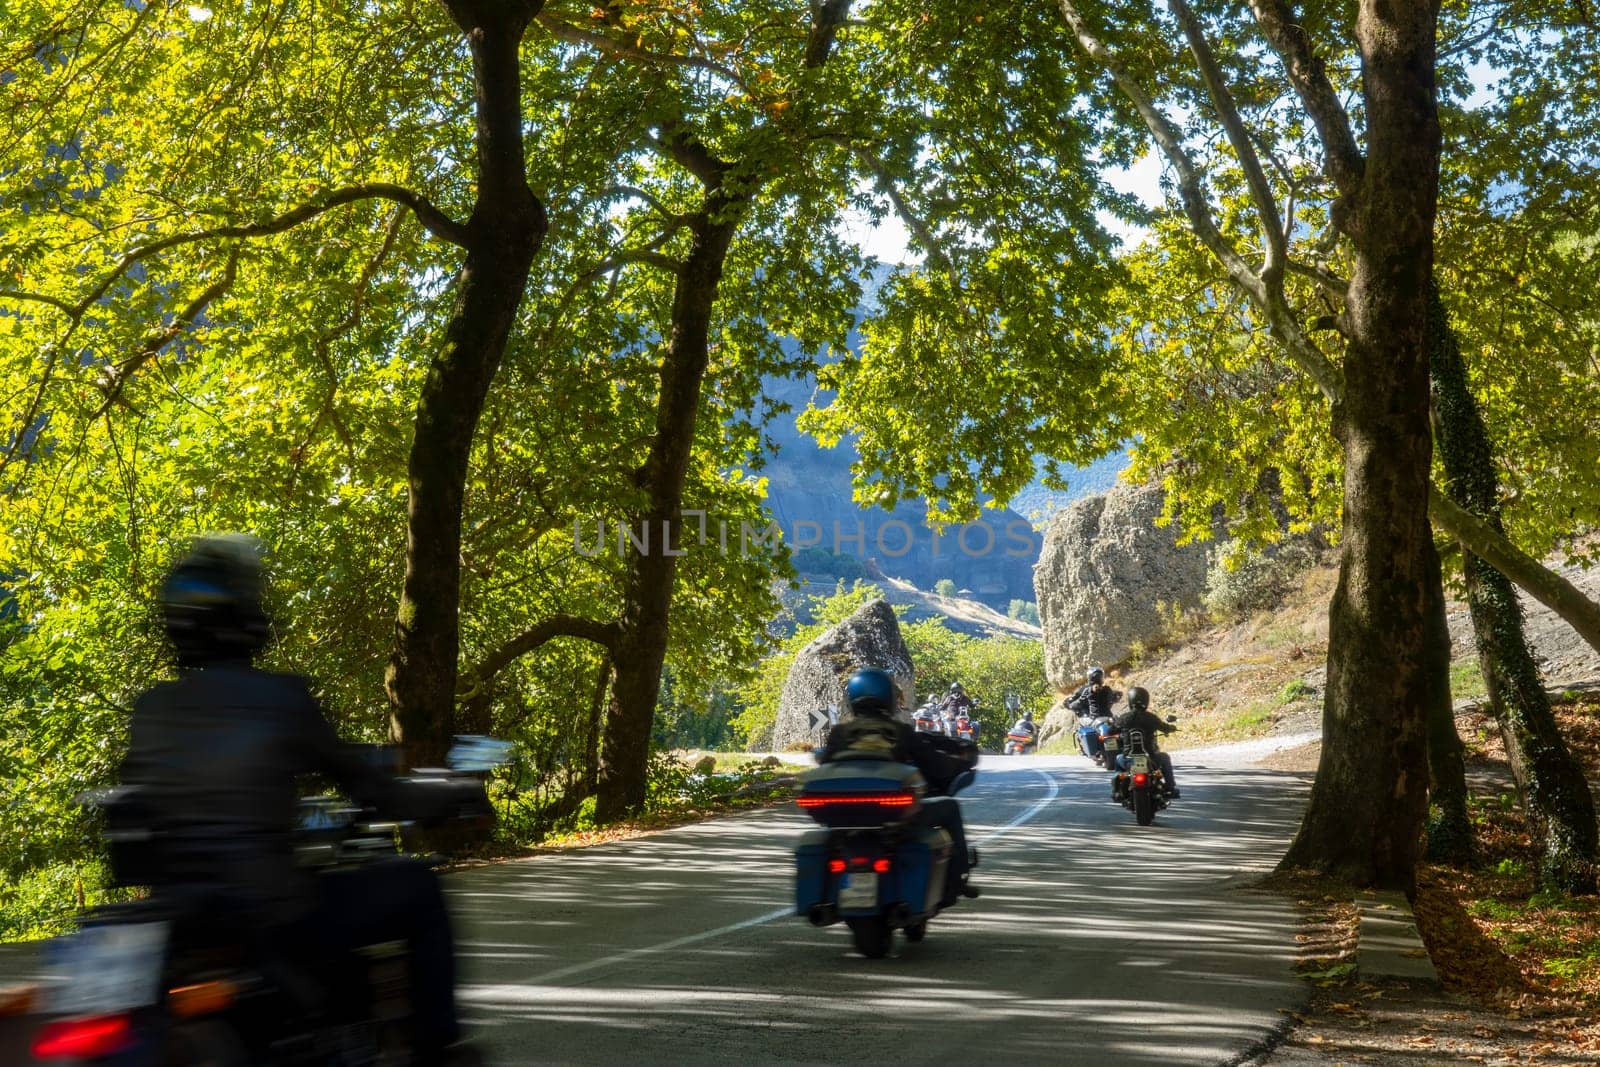 Greece. Summer sunny day in the shade of trees. Group of motorcycle tourists on a winding road